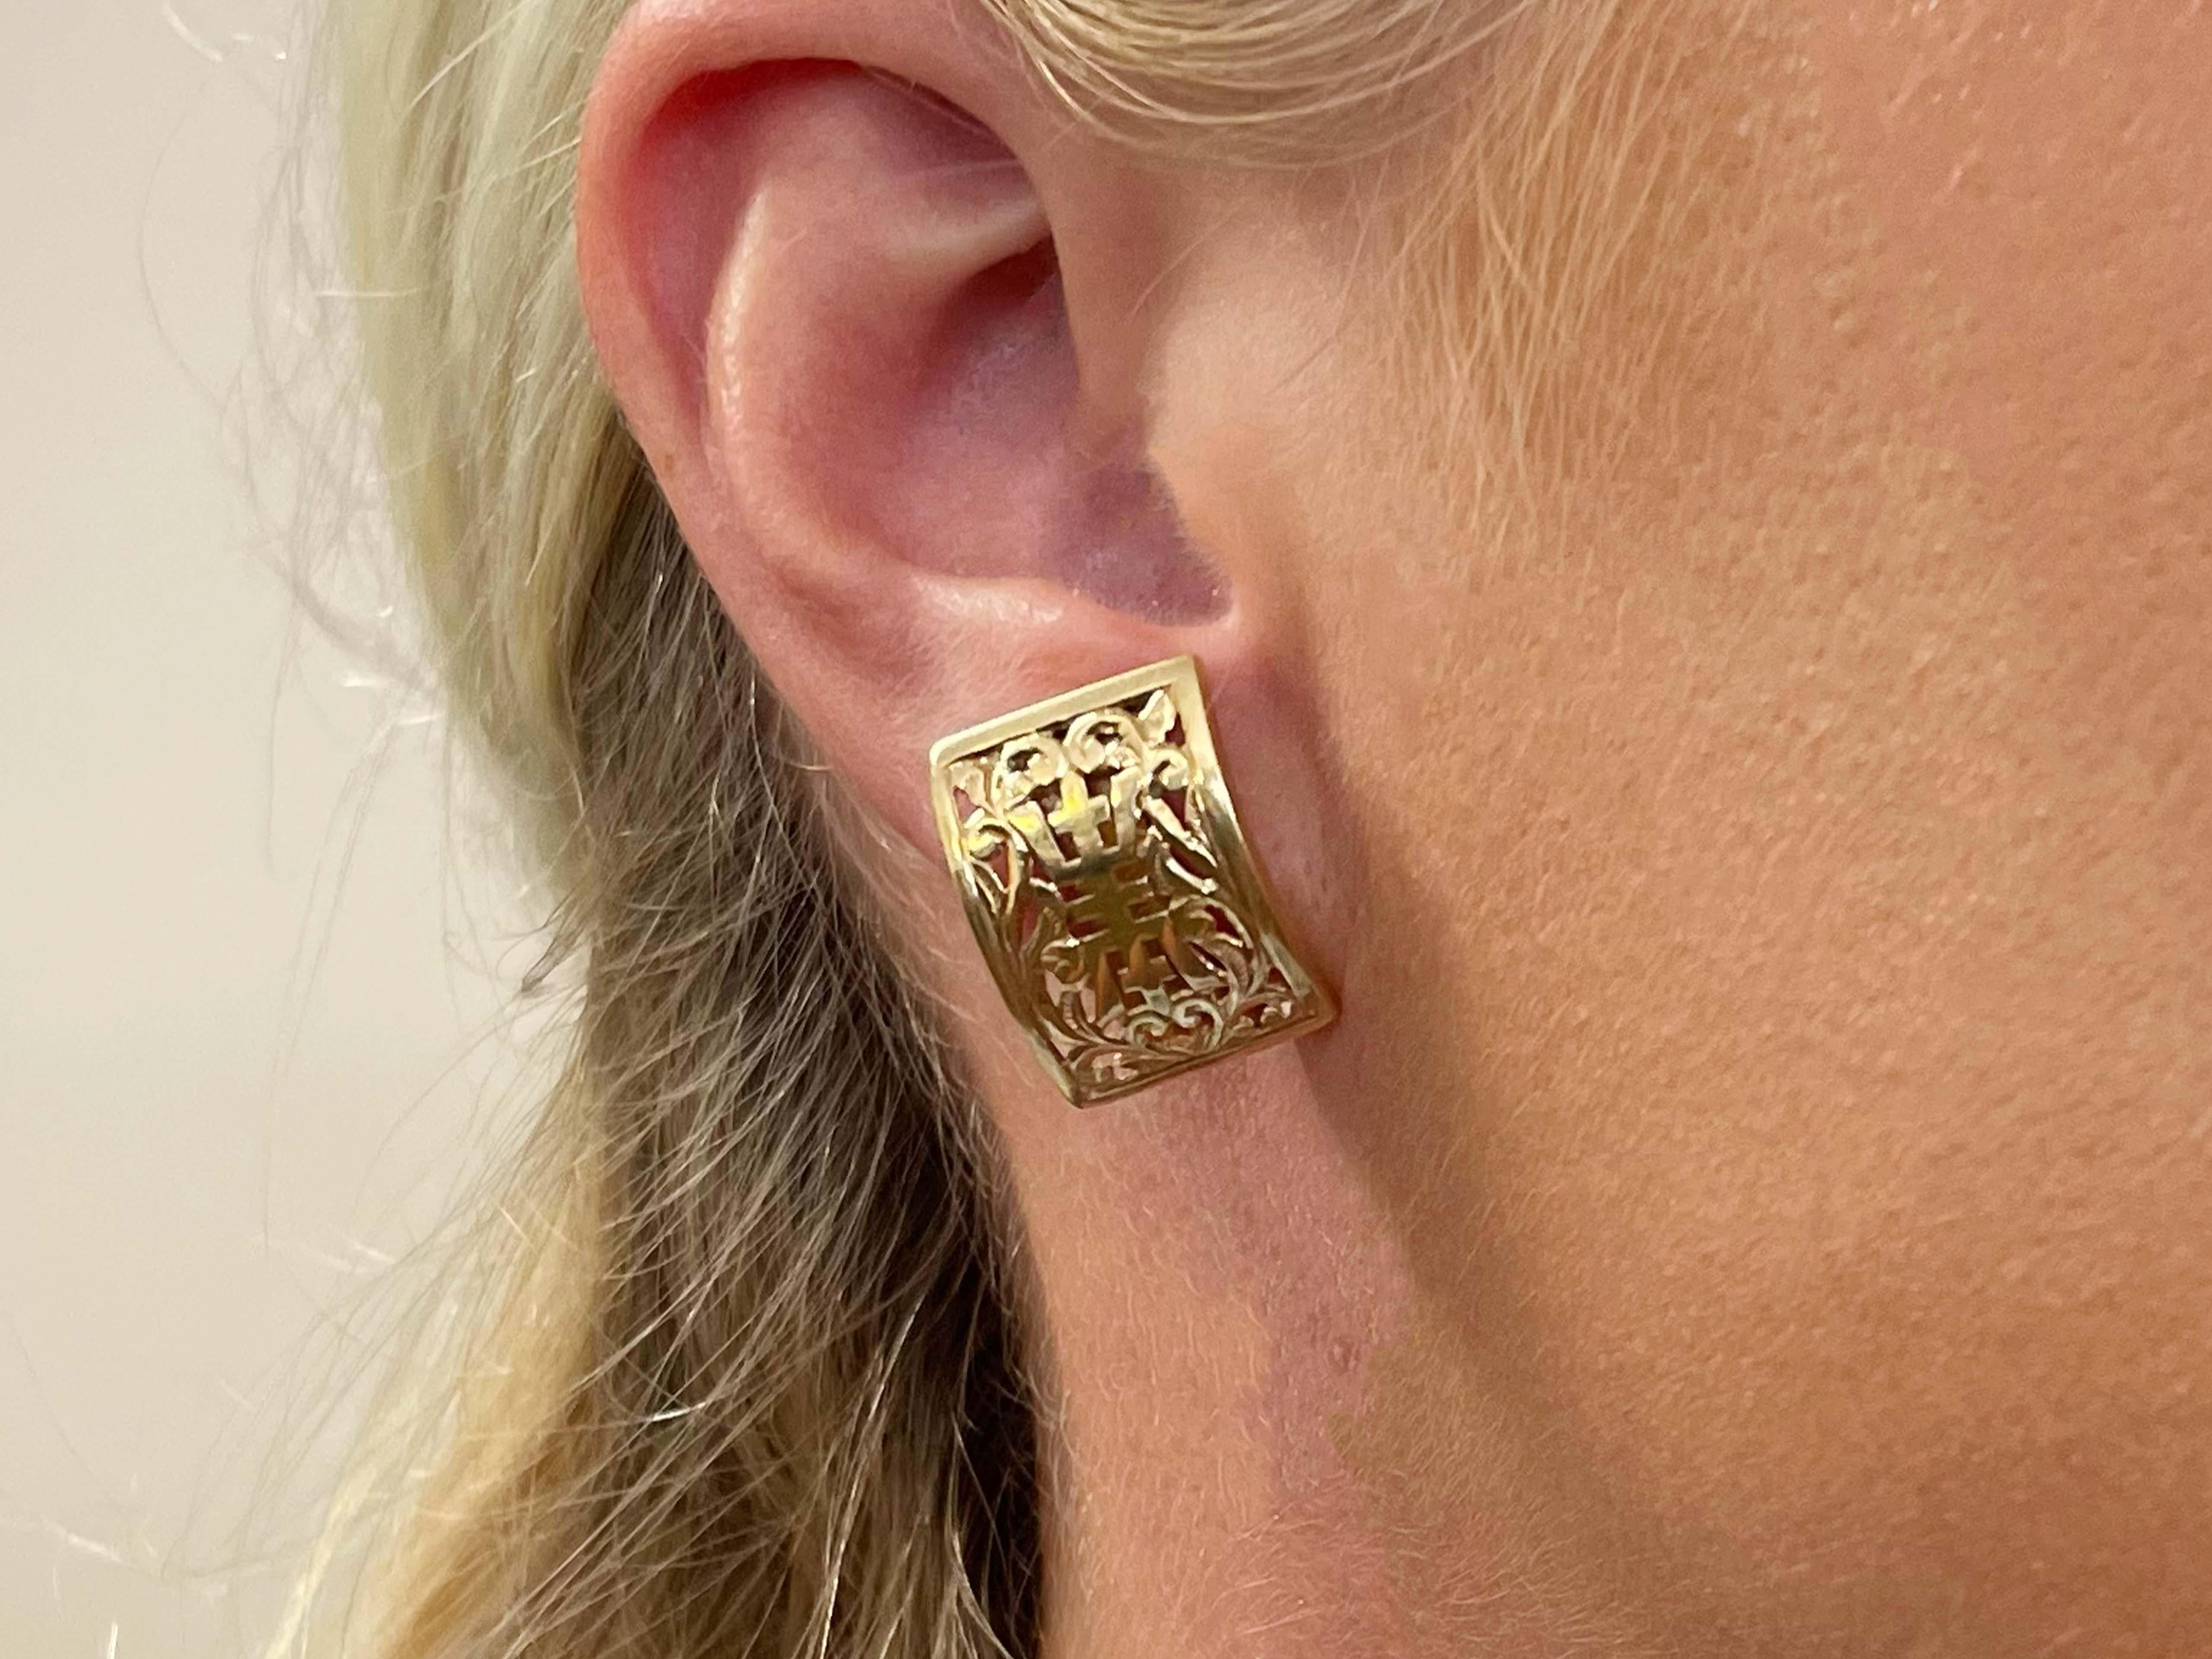 Earrings Specifications:

Designer: Ming's

Metal: 14K Yellow Gold

Total Weight: 6.1 Grams

Earring Measurements Width: 19.5 mm x 15 mm

Stamped: 